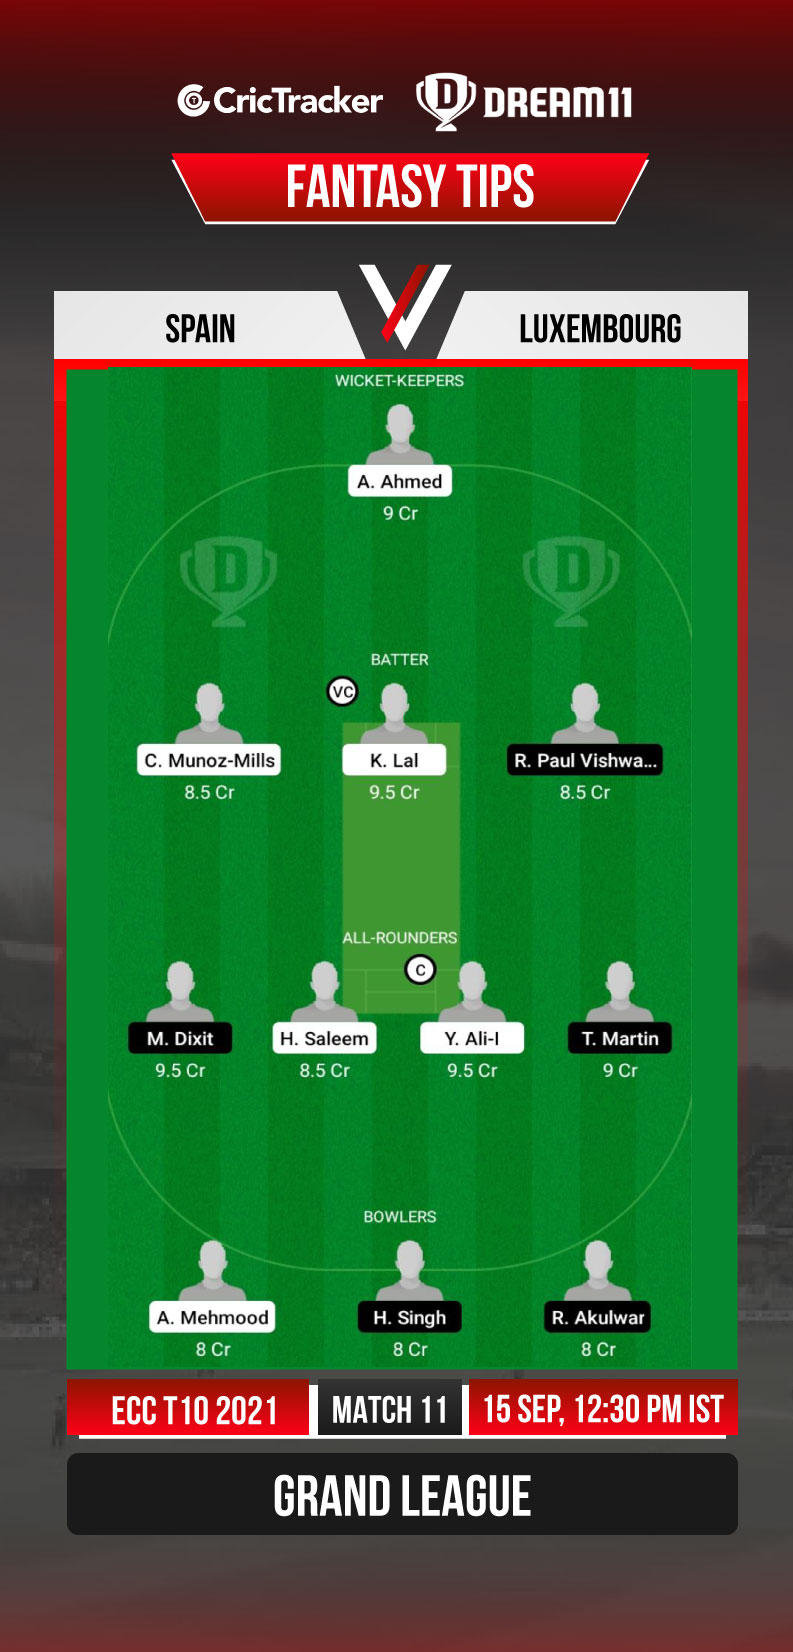 ecc-t10-2021-match-11-spa-vs-lux-dream11 -prediction-fantasy-cricket-tips-playing-11-pitch-report-and-injury-update